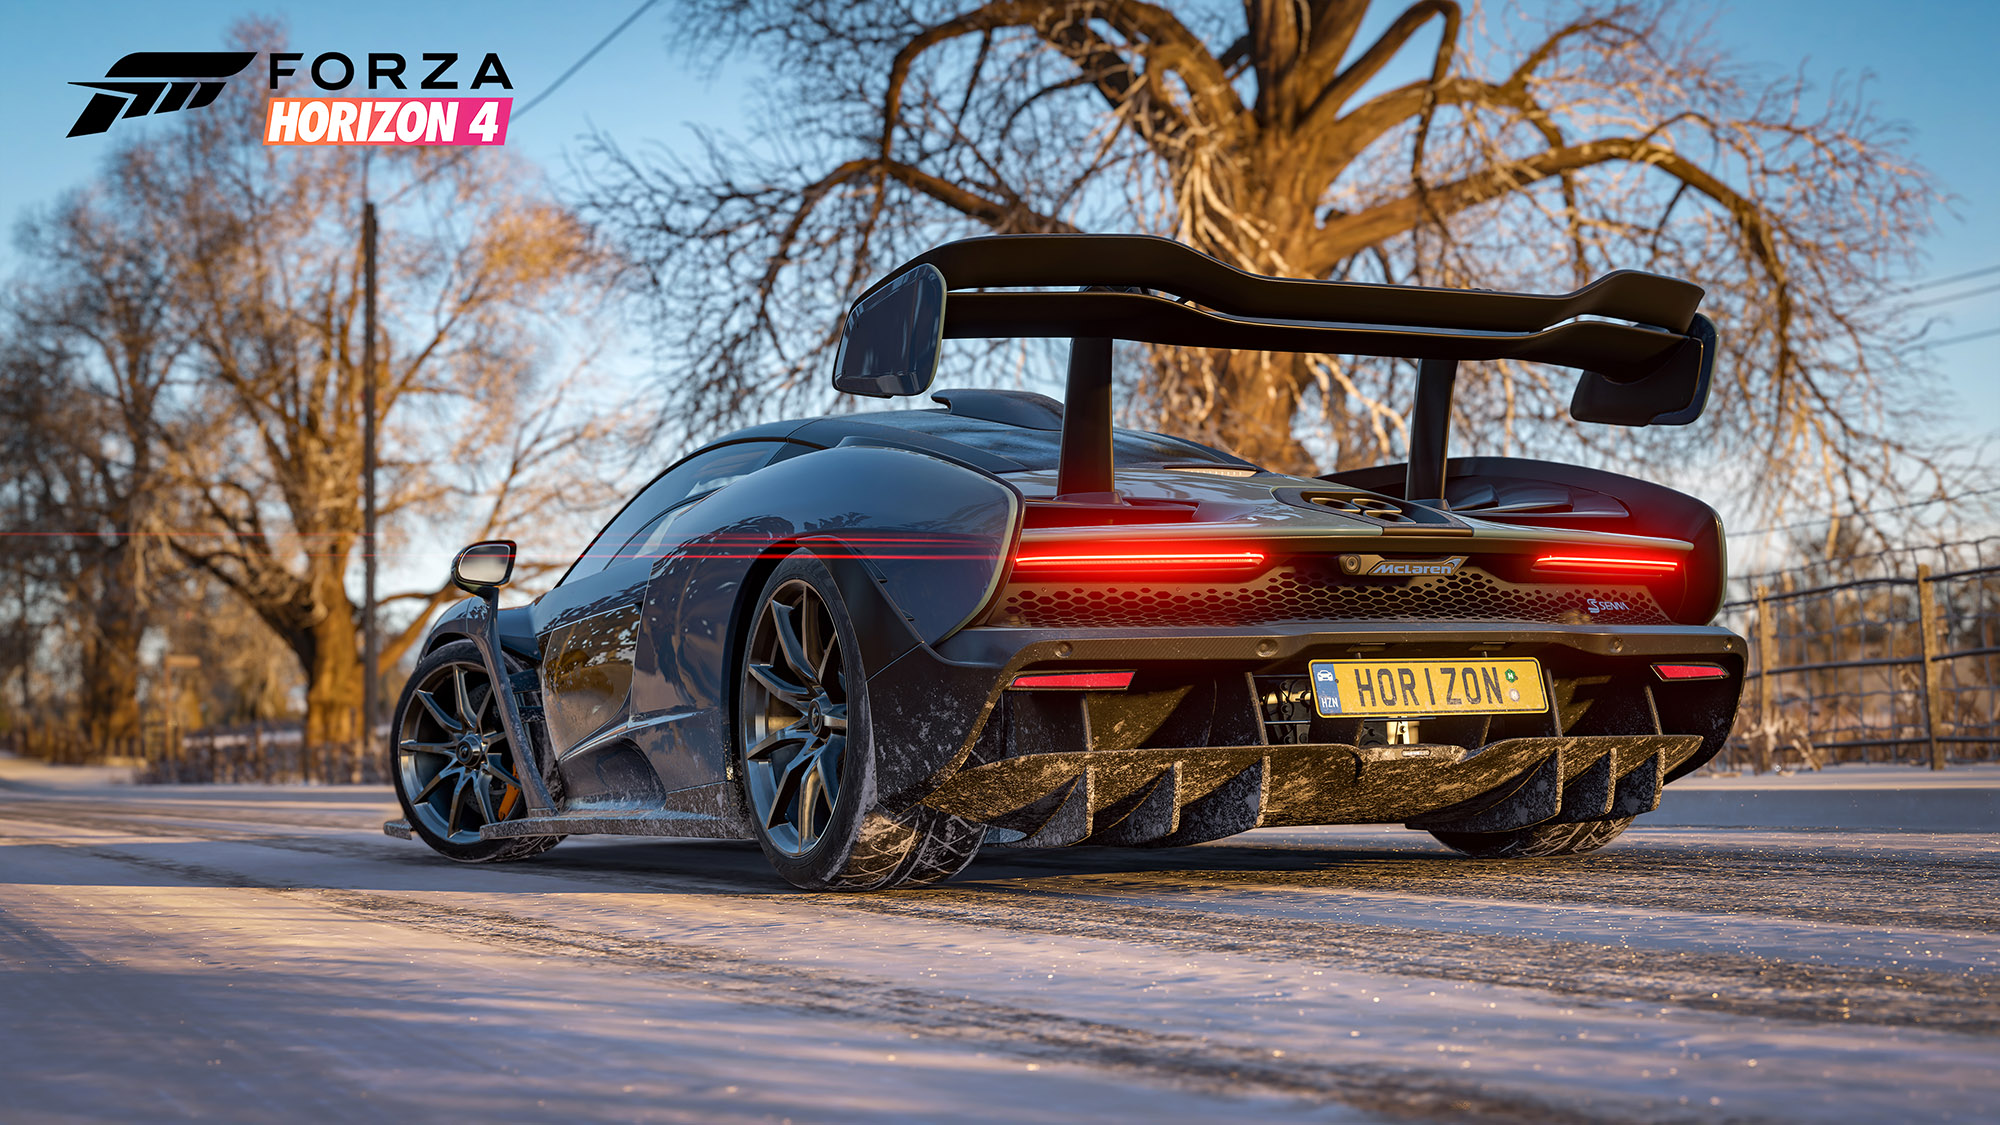 We Tried Playing Forza Horizon 4 on Our Work Laptop. Here's How It